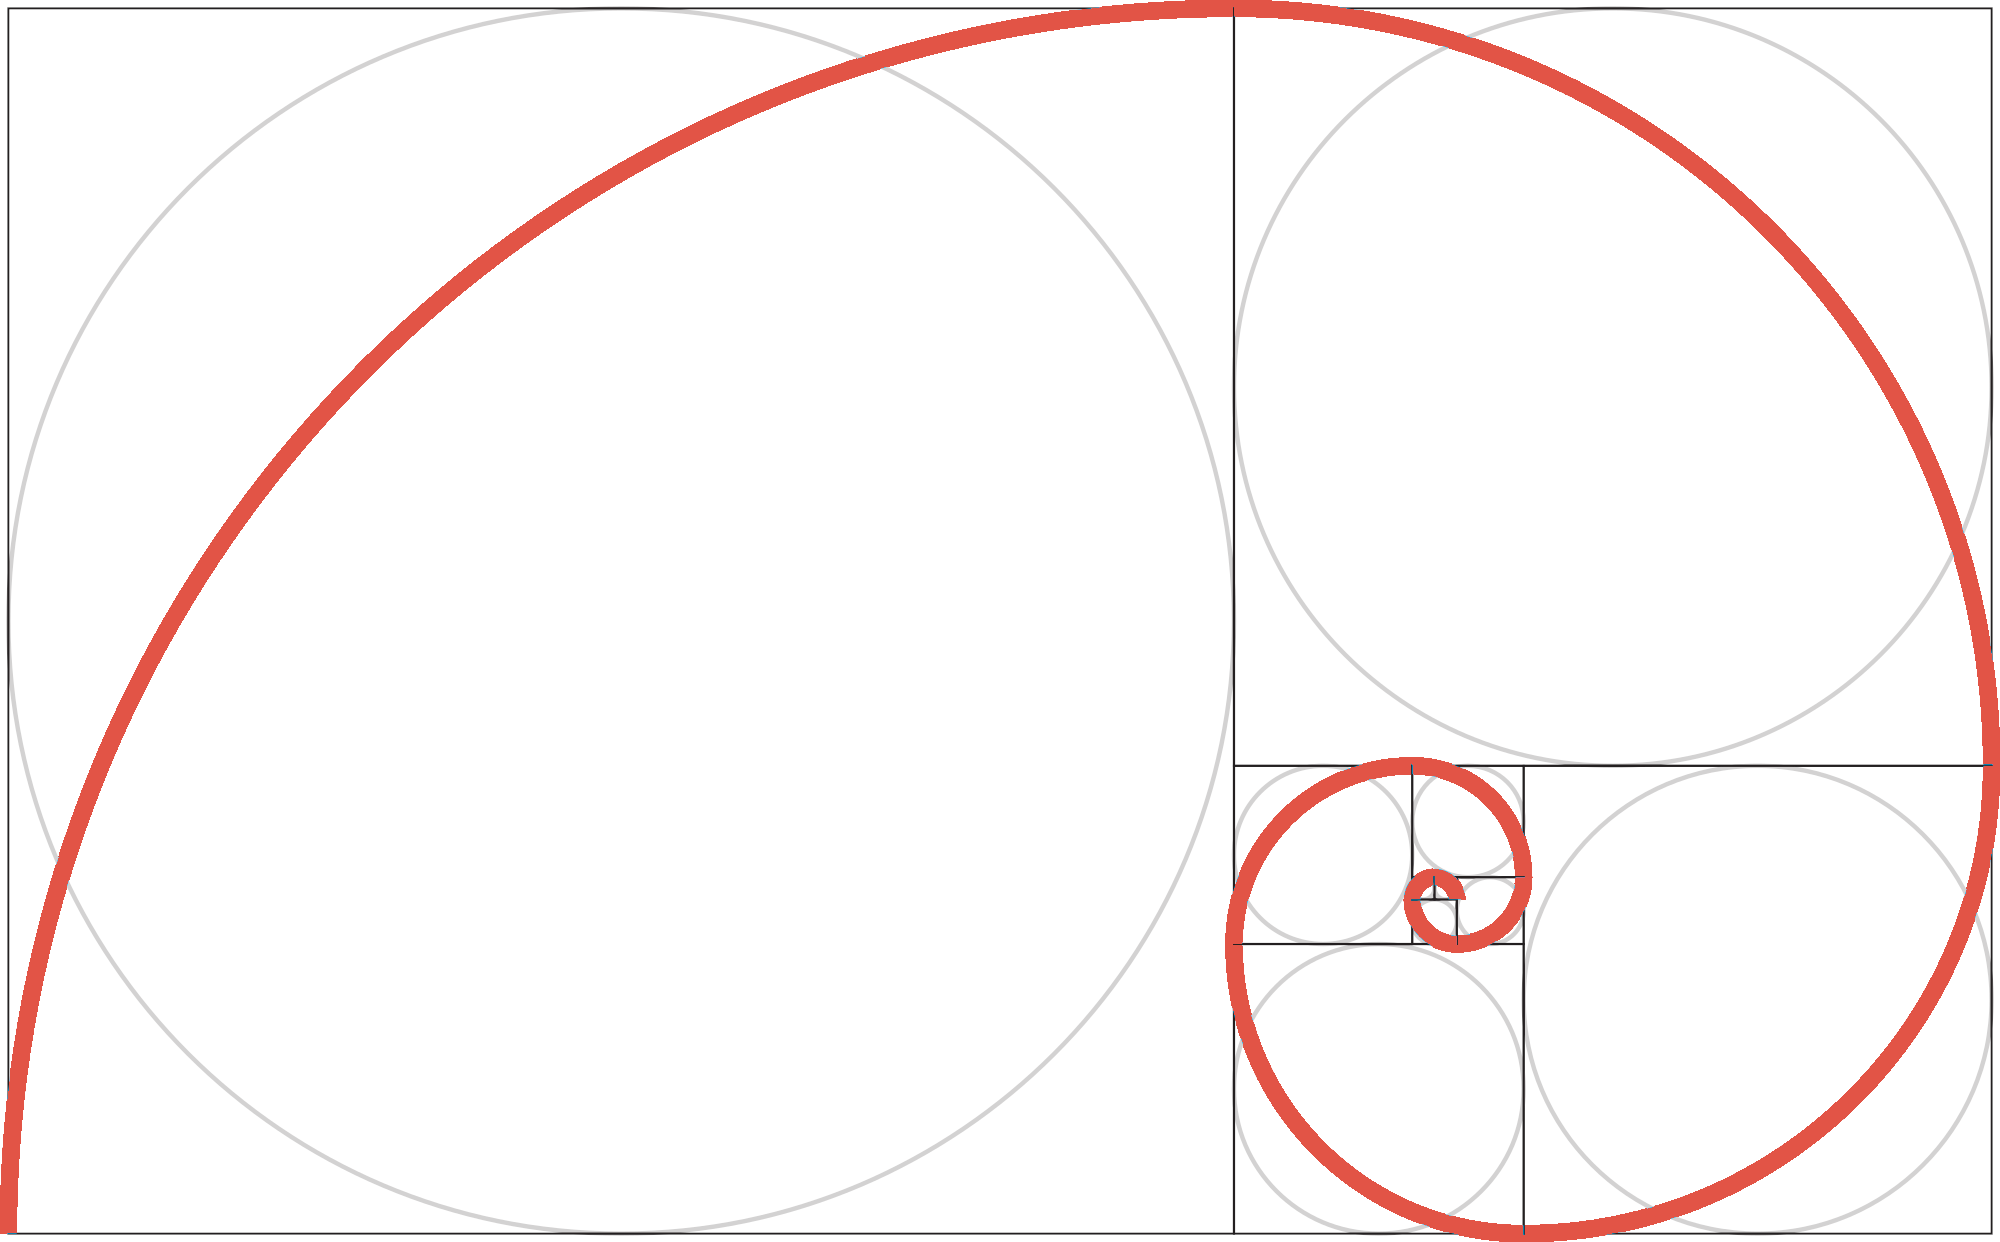 Fibonacci spiral that is formed when forming squares with the widths of each term in the Fibonacci sequence